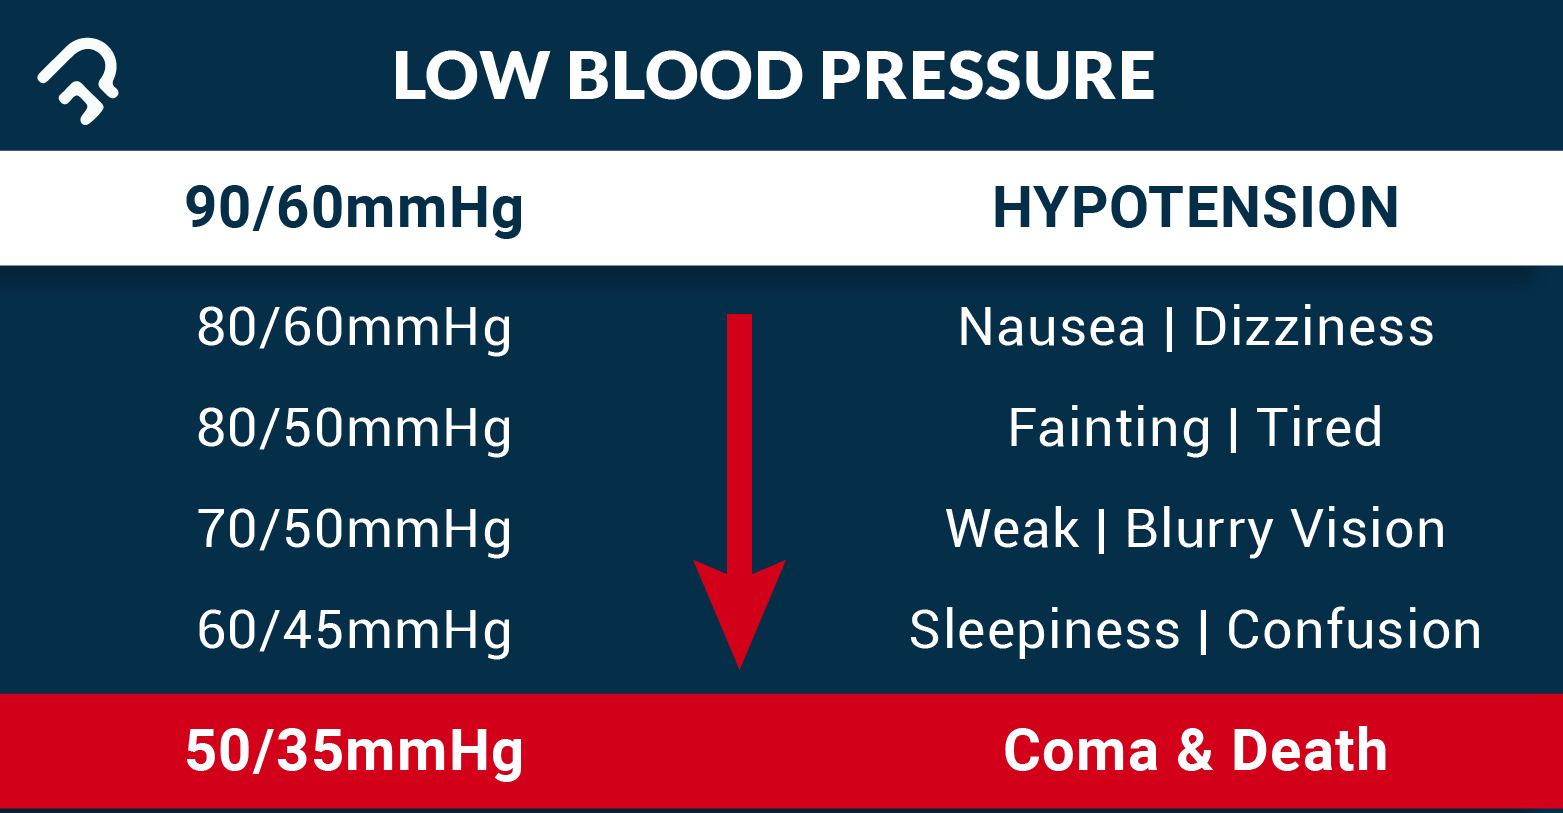 When Is Low Blood Pressure Too Low? Hypotension and More